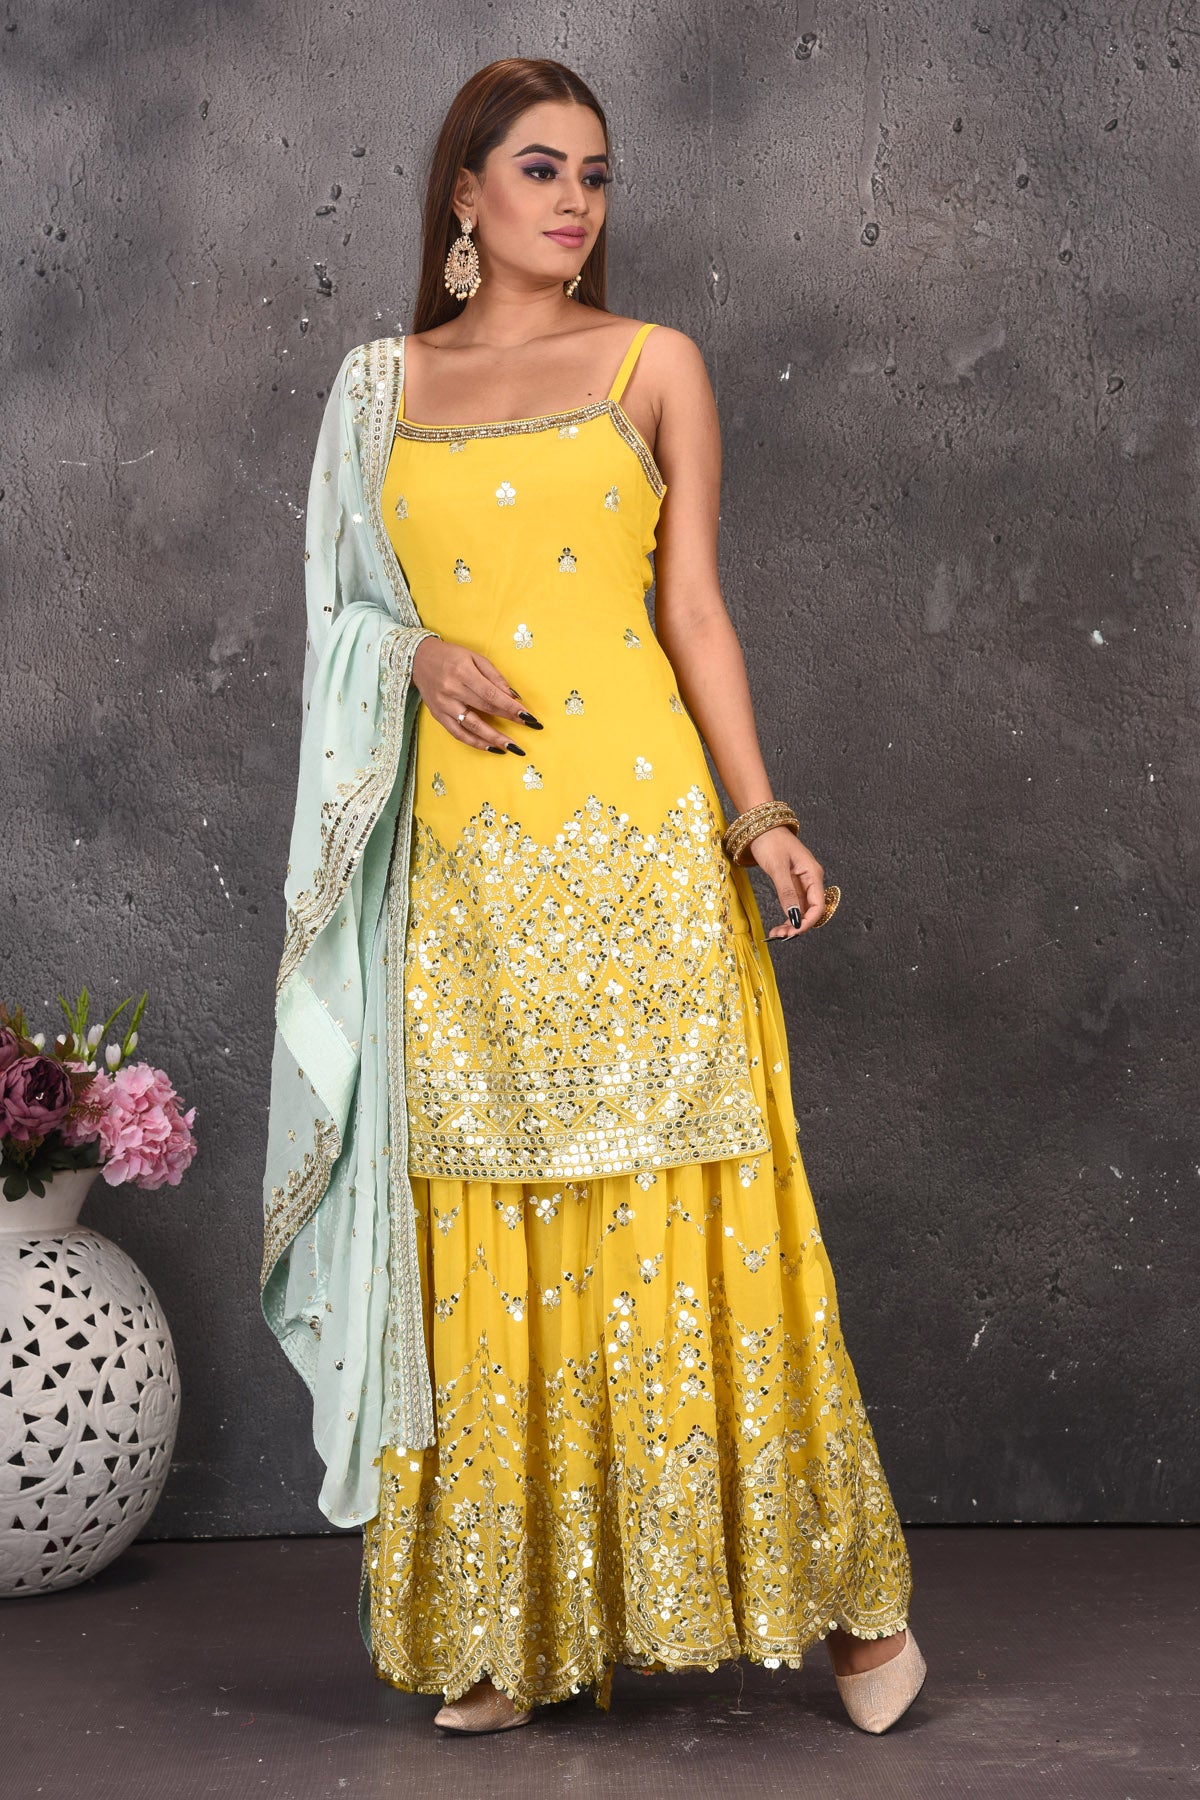 Buy stunning yellow mirror embroidery sharara suit online in USA with powder blue dupatta. Look stylish at parties and wedding festivities in designer dresses, Indowestern outfits, Anarkali suits, wedding lehengas, palazzo suits, sharara suits from Pure Elegance Indian clothing store in USA.-full view